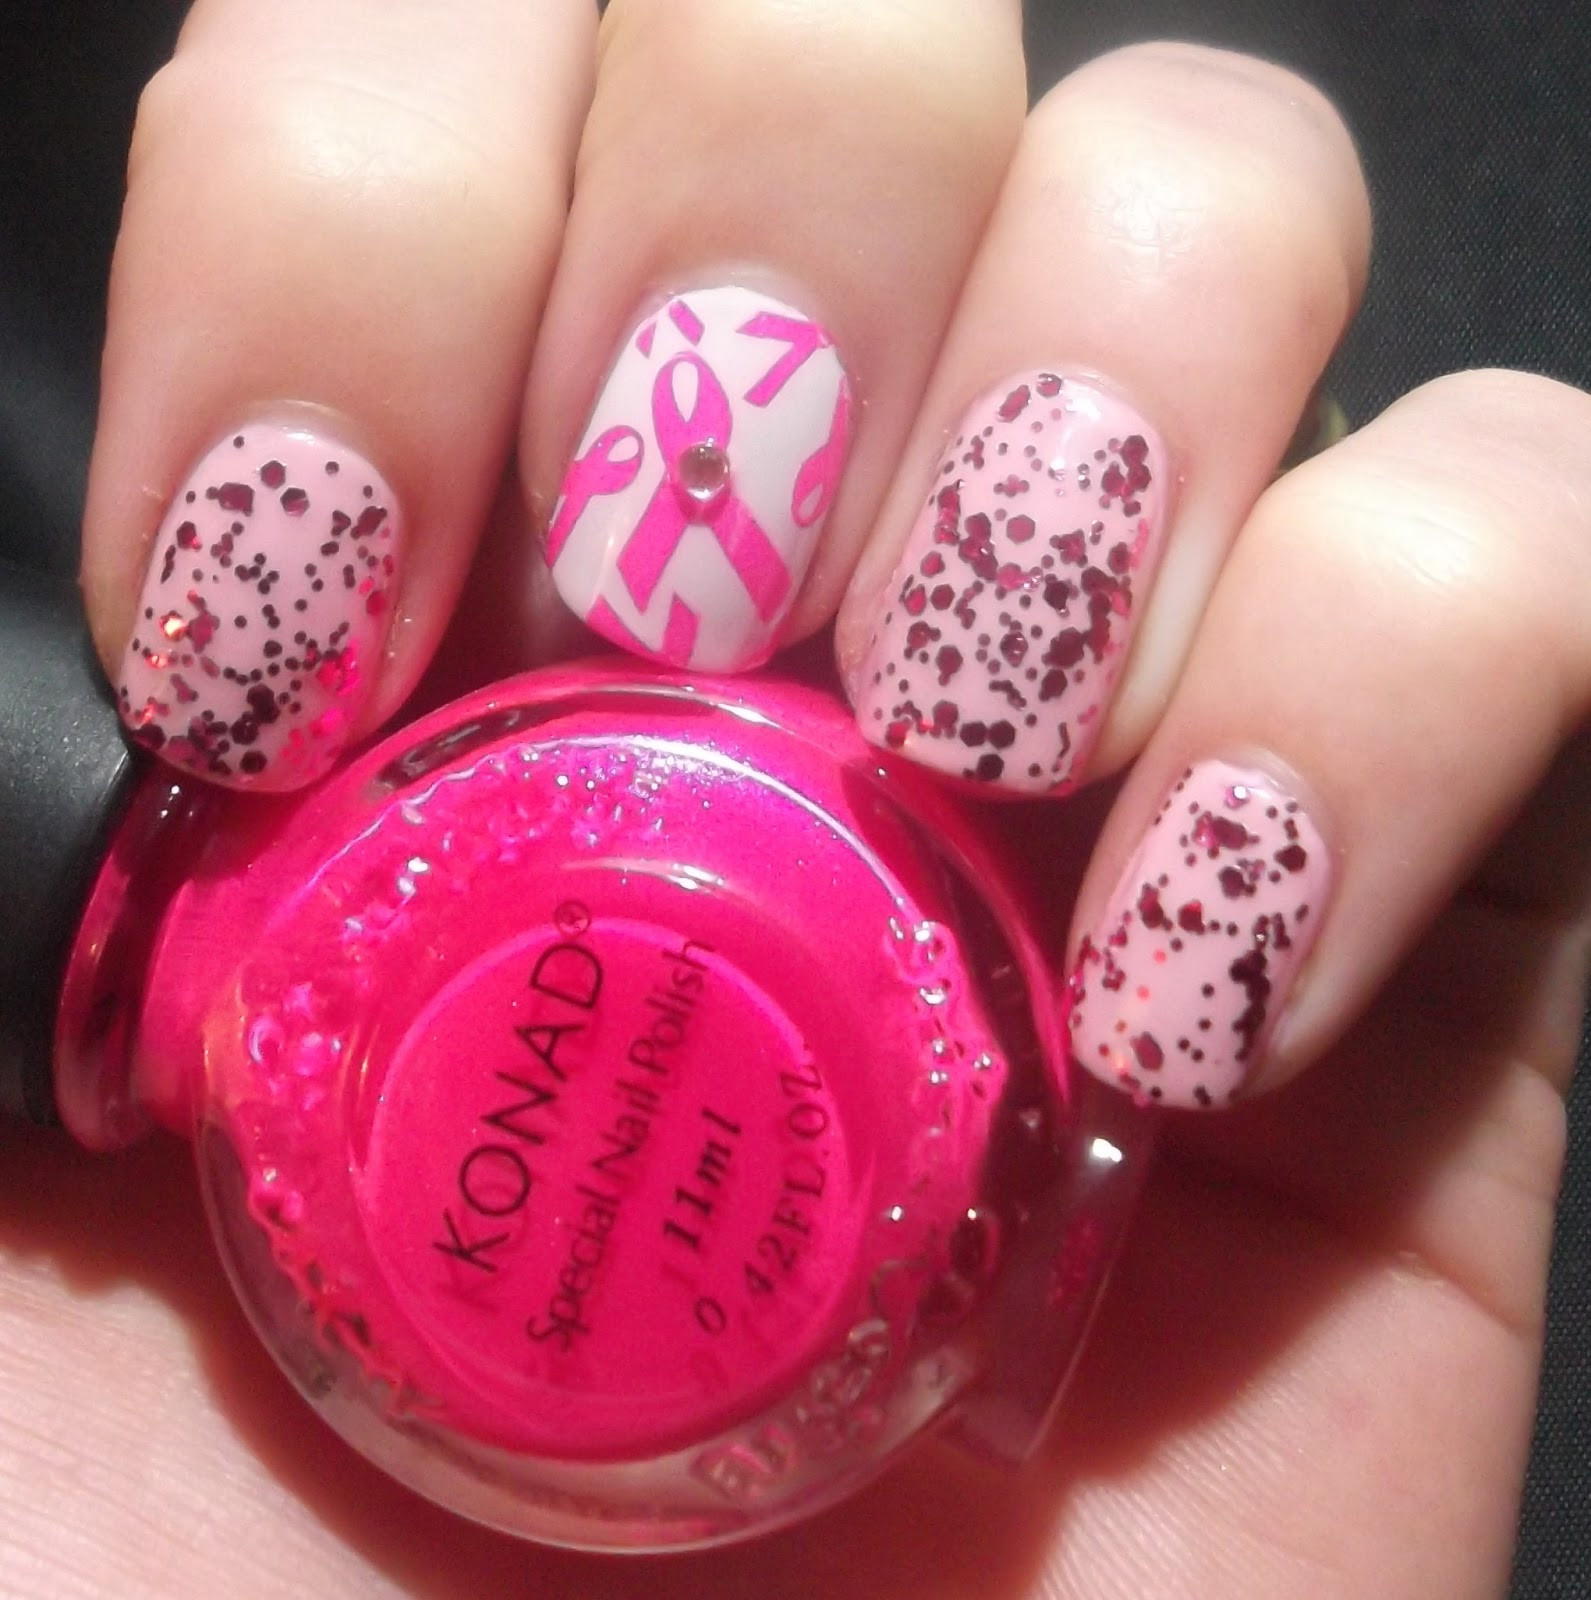 Breast Cancer Nail Art
 Lou is Perfectly Polished Breast Cancer Awareness Nail Art